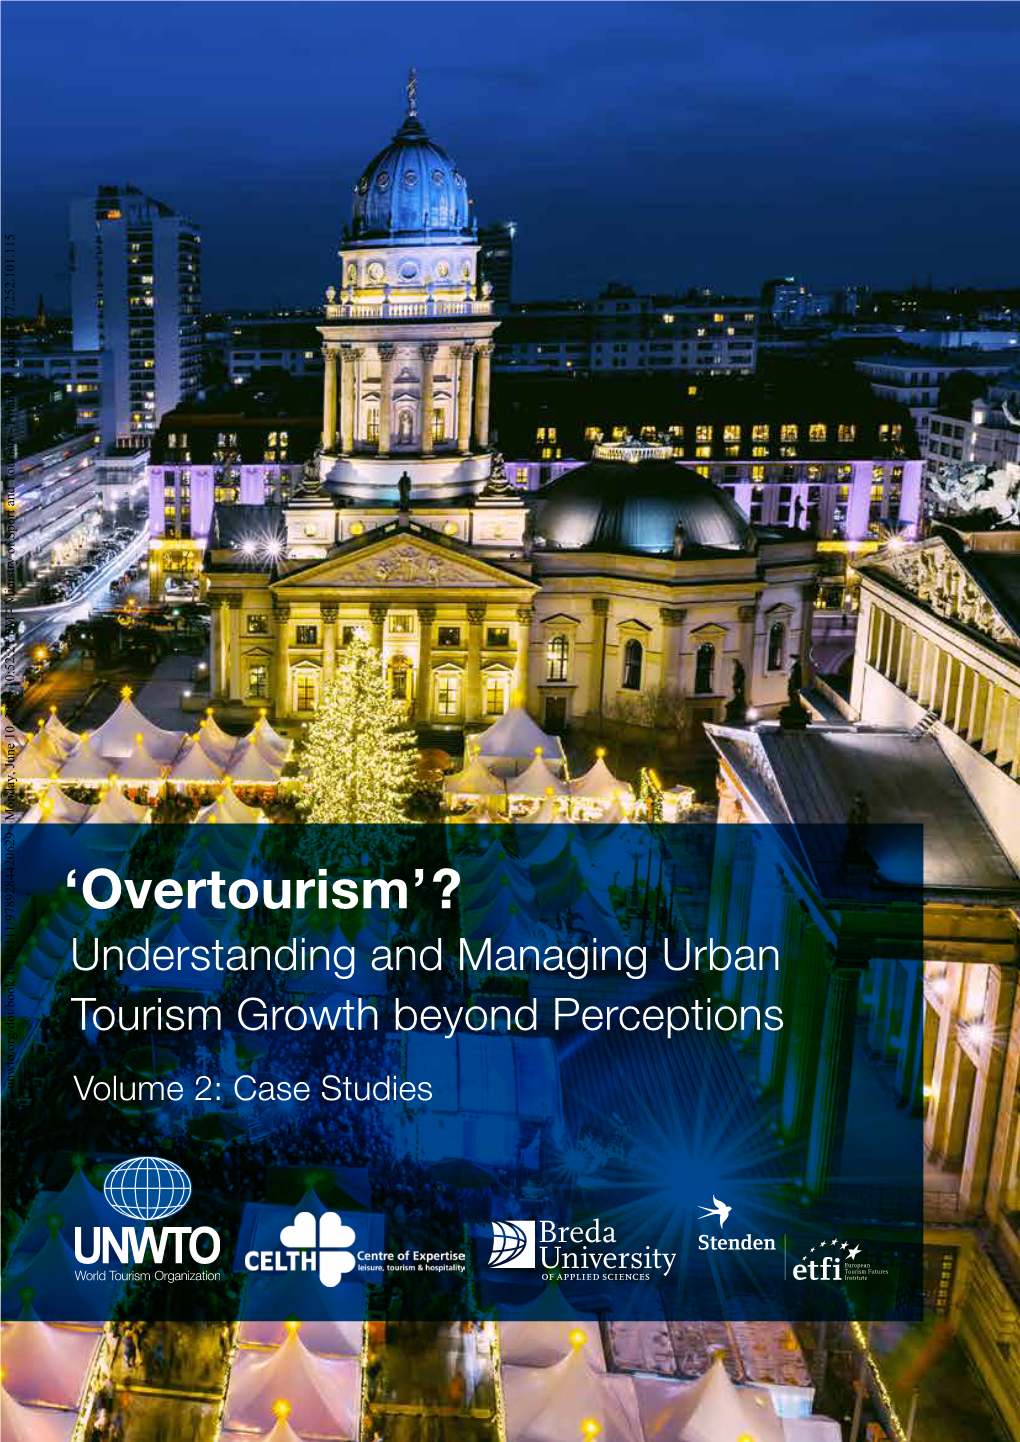 Overtourism'? – Understanding and Managing Urban Tourism Growth